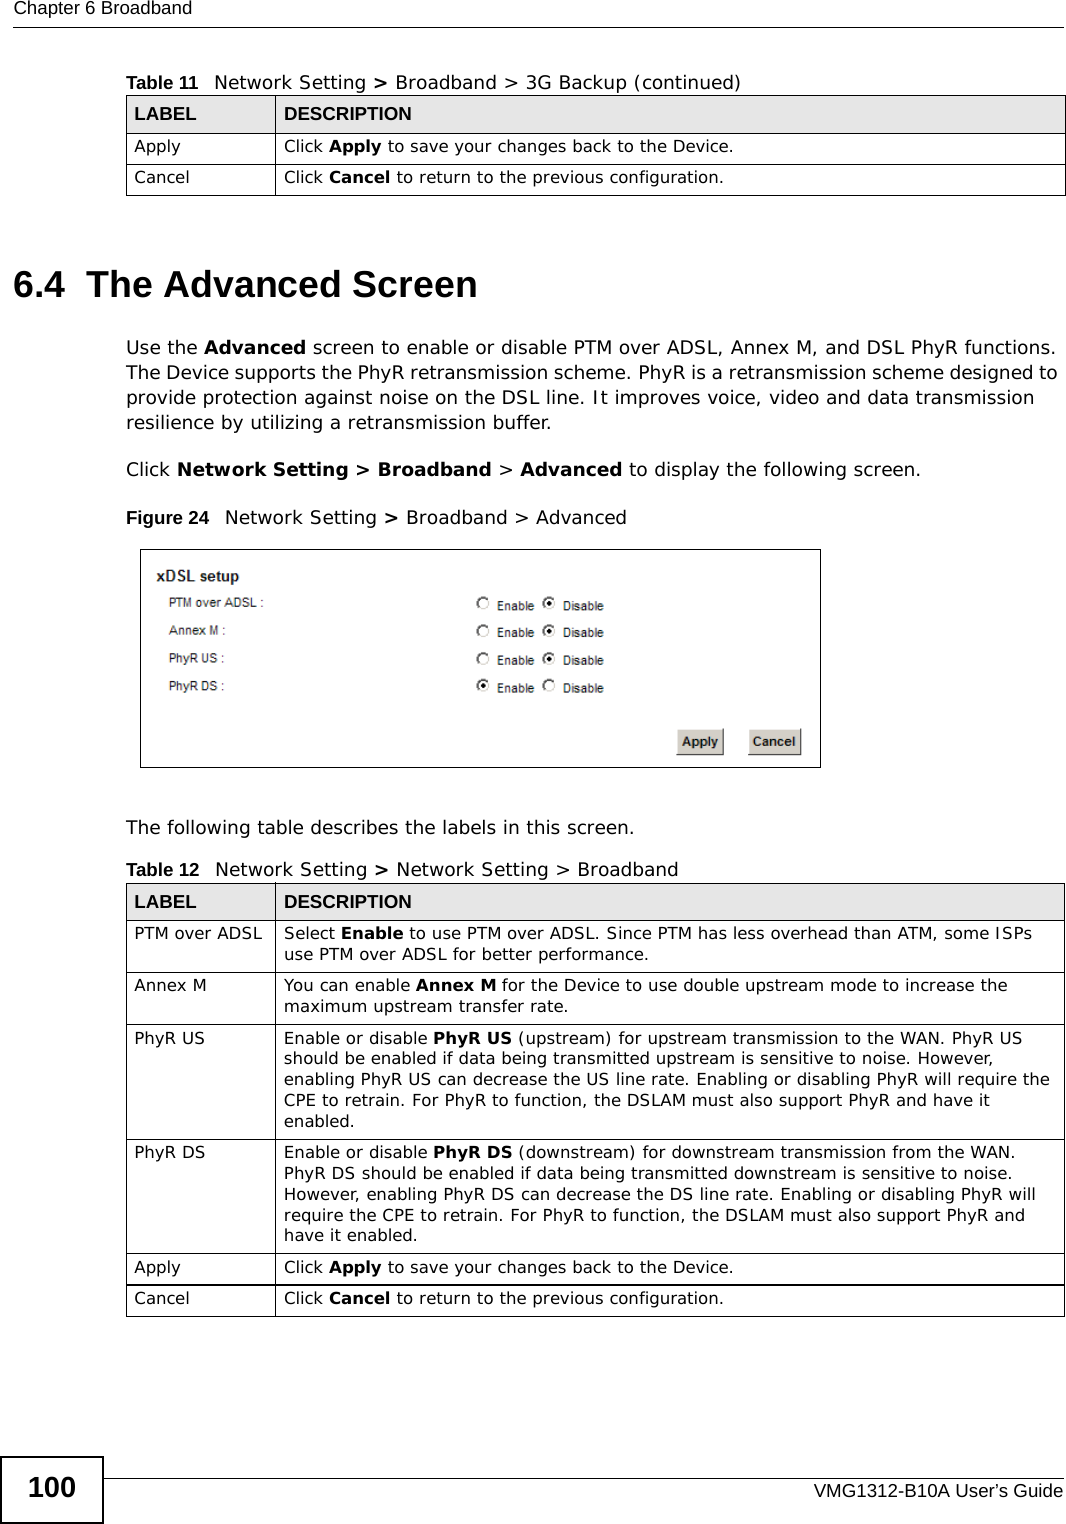 Chapter 6 BroadbandVMG1312-B10A User’s Guide1006.4  The Advanced ScreenUse the Advanced screen to enable or disable PTM over ADSL, Annex M, and DSL PhyR functions. The Device supports the PhyR retransmission scheme. PhyR is a retransmission scheme designed to provide protection against noise on the DSL line. It improves voice, video and data transmission resilience by utilizing a retransmission buffer.Click Network Setting &gt; Broadband &gt; Advanced to display the following screen.Figure 24   Network Setting &gt; Broadband &gt; AdvancedThe following table describes the labels in this screen. Apply Click Apply to save your changes back to the Device.Cancel Click Cancel to return to the previous configuration.Table 11   Network Setting &gt; Broadband &gt; 3G Backup (continued)LABEL DESCRIPTIONTable 12   Network Setting &gt; Network Setting &gt; BroadbandLABEL DESCRIPTIONPTM over ADSL Select Enable to use PTM over ADSL. Since PTM has less overhead than ATM, some ISPs use PTM over ADSL for better performance.Annex M You can enable Annex M for the Device to use double upstream mode to increase the maximum upstream transfer rate.PhyR US Enable or disable PhyR US (upstream) for upstream transmission to the WAN. PhyR US should be enabled if data being transmitted upstream is sensitive to noise. However, enabling PhyR US can decrease the US line rate. Enabling or disabling PhyR will require the CPE to retrain. For PhyR to function, the DSLAM must also support PhyR and have it enabled.PhyR DS Enable or disable PhyR DS (downstream) for downstream transmission from the WAN. PhyR DS should be enabled if data being transmitted downstream is sensitive to noise. However, enabling PhyR DS can decrease the DS line rate. Enabling or disabling PhyR will require the CPE to retrain. For PhyR to function, the DSLAM must also support PhyR and have it enabled.Apply Click Apply to save your changes back to the Device.Cancel Click Cancel to return to the previous configuration.